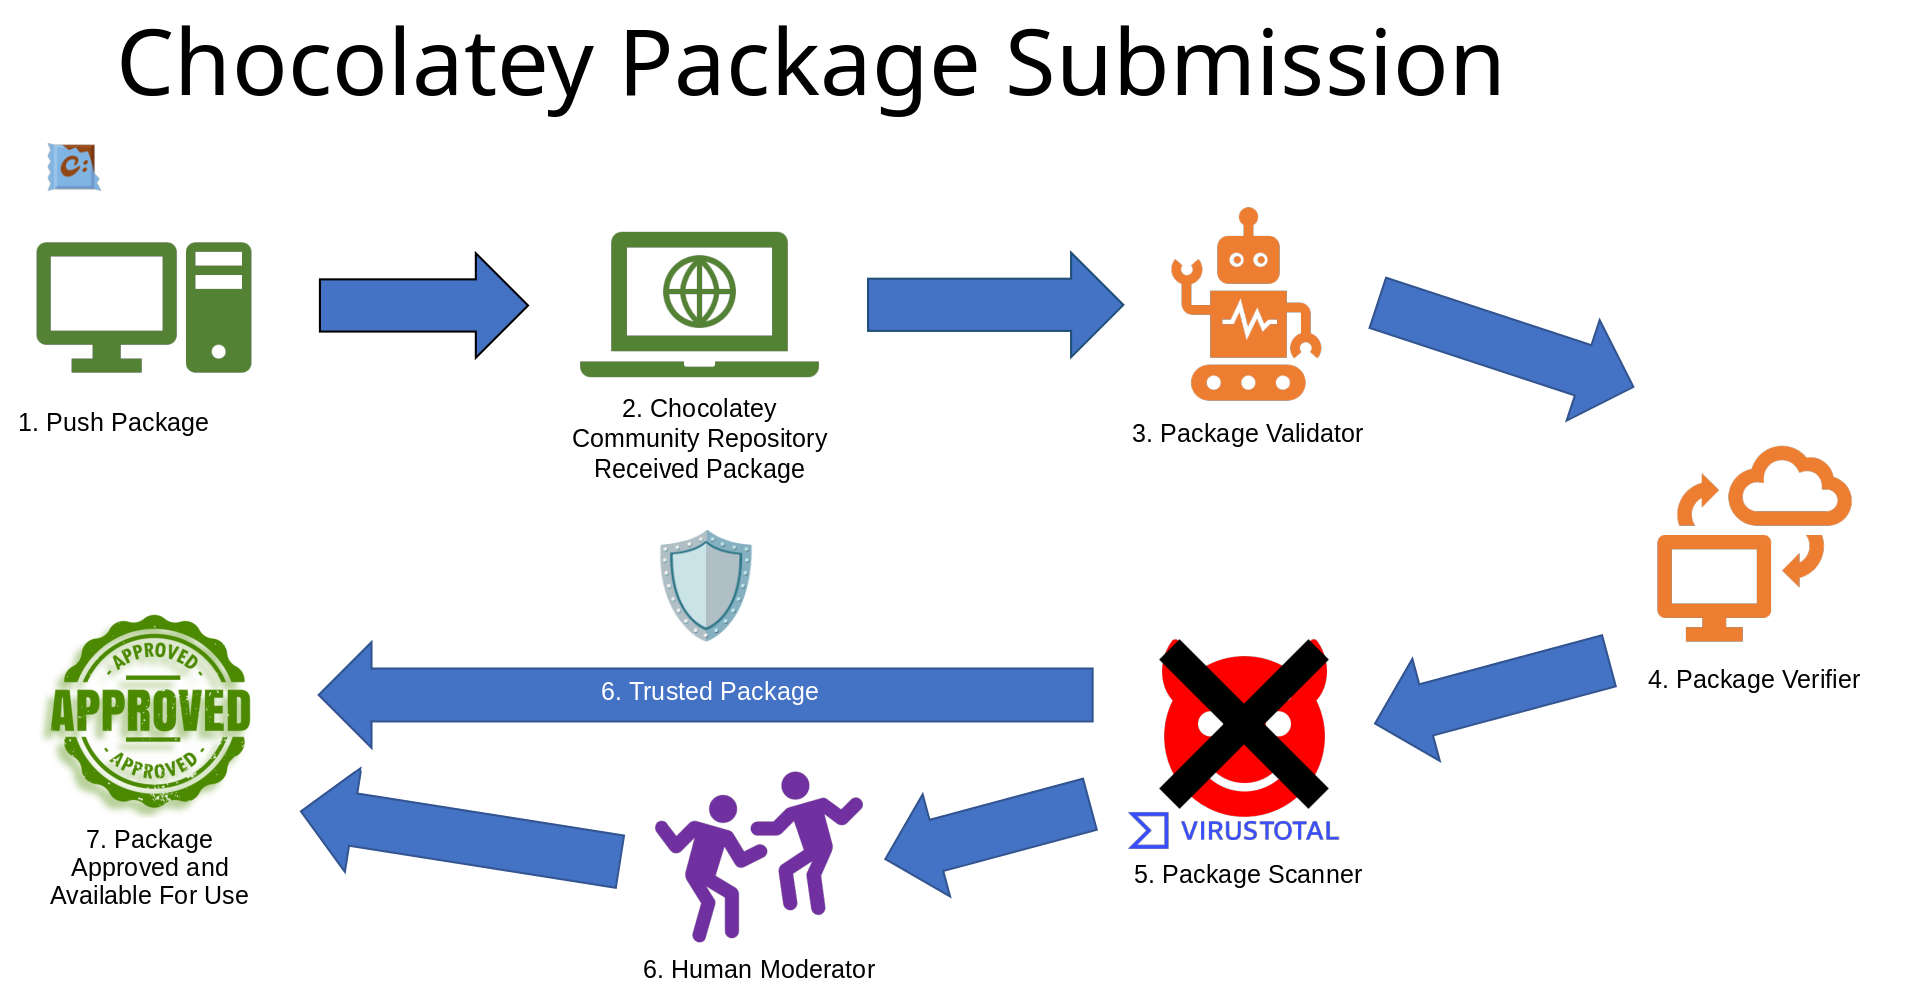 Package Moderation process when you submit a package to the Chocolatey Community Repository